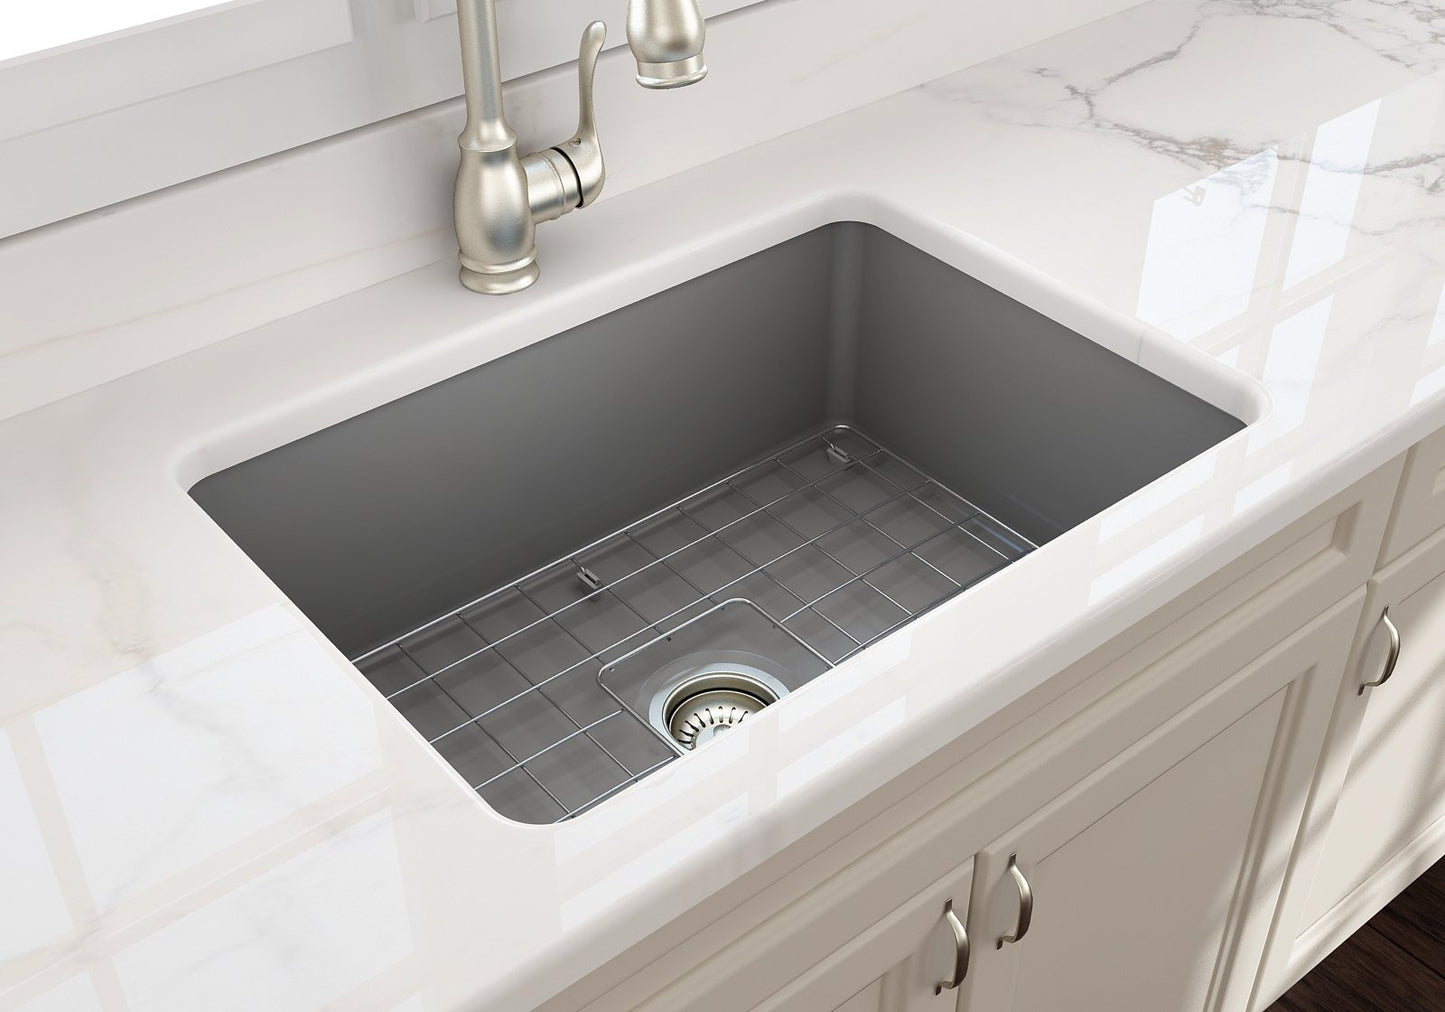 Bocchi Undermount Fireclay 27" Single Bowl Kitchen Sink (Call for special pricing)